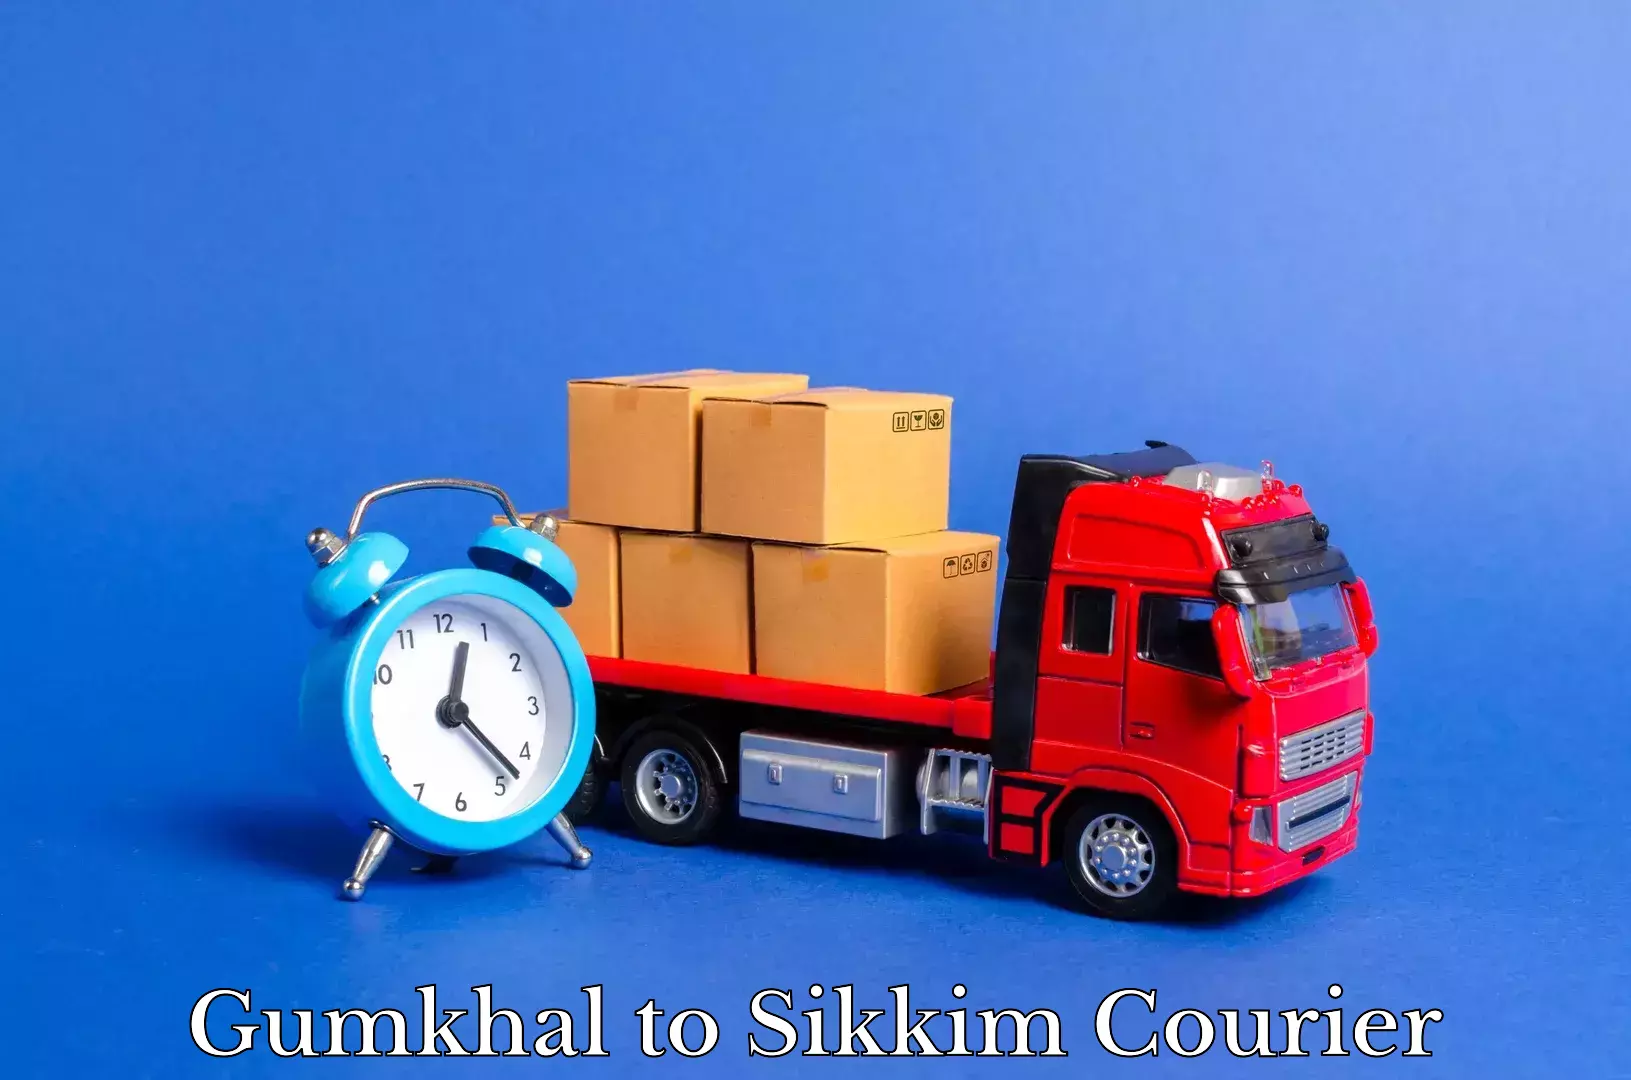 Reliable movers Gumkhal to Pelling